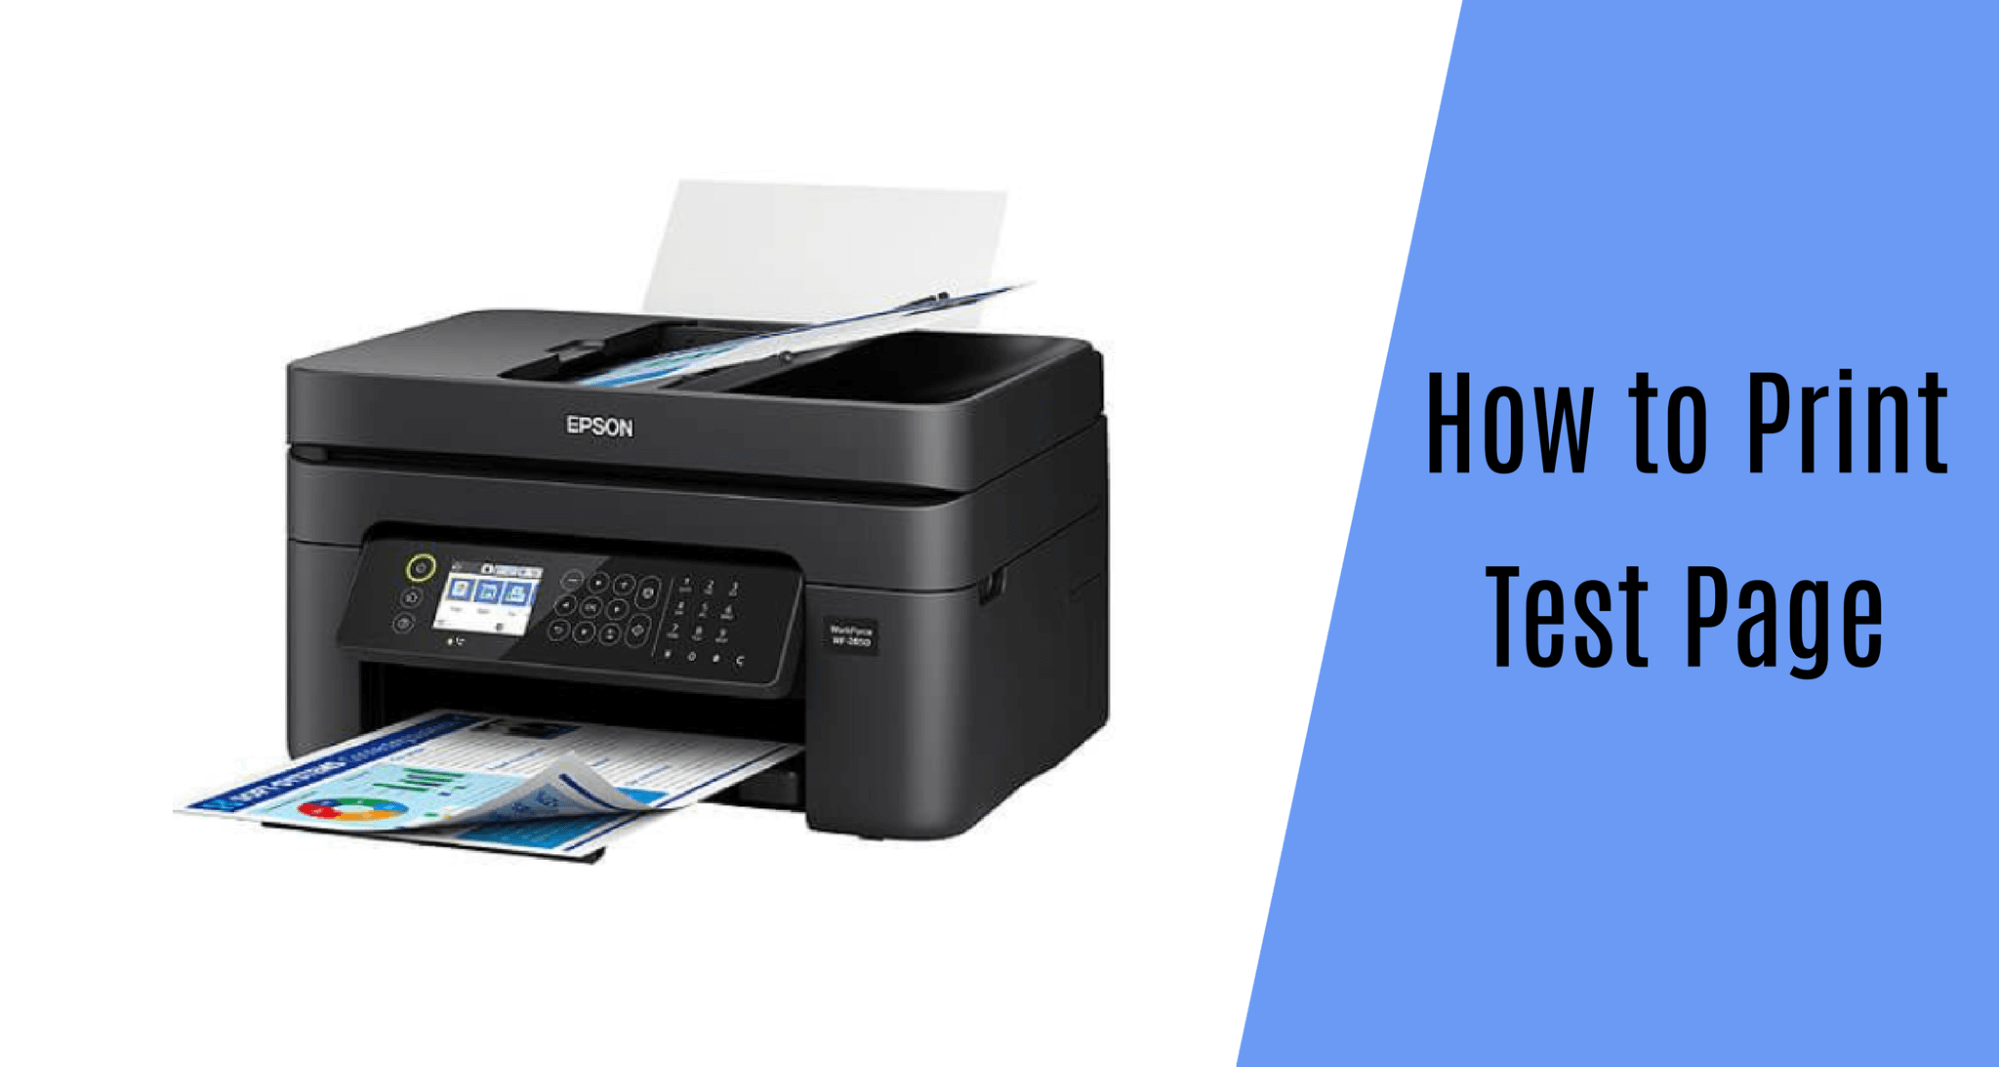 How to Print Test Page on Windows and Mac